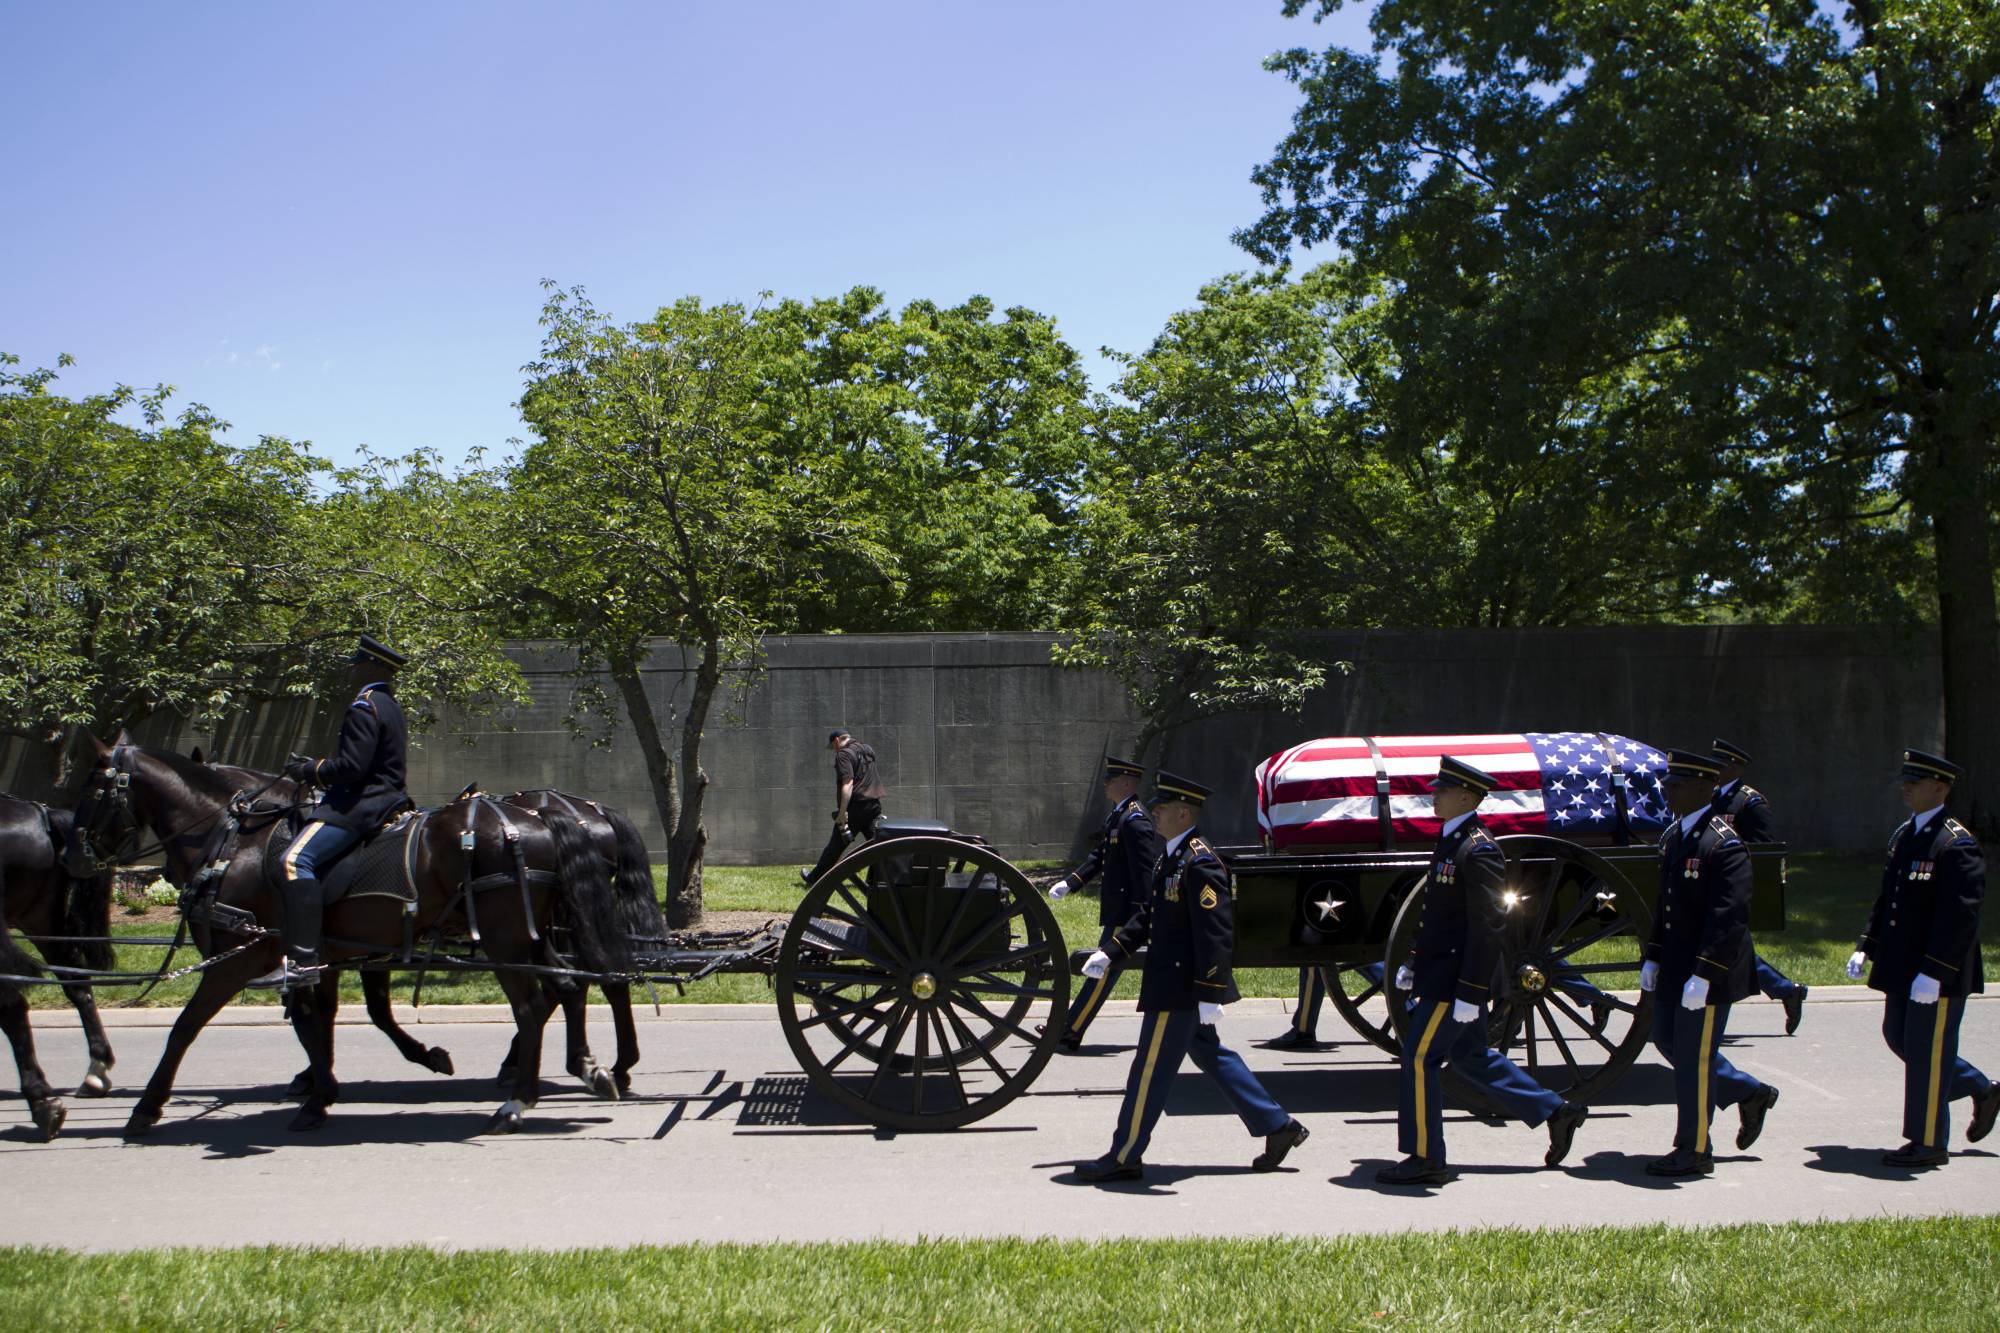 A caisson carries the casket of U.S. Army Air Forces 2nd Lt. Robert R. Keown to the burial site at Arlington National Cemetery in Arlington, Va., on Friday, June 15, 2018. Keown was piloting his P-38 aircraft when it crashed in Papua New Guinea in 1944. (AP Photo/Jose Luis Magana)